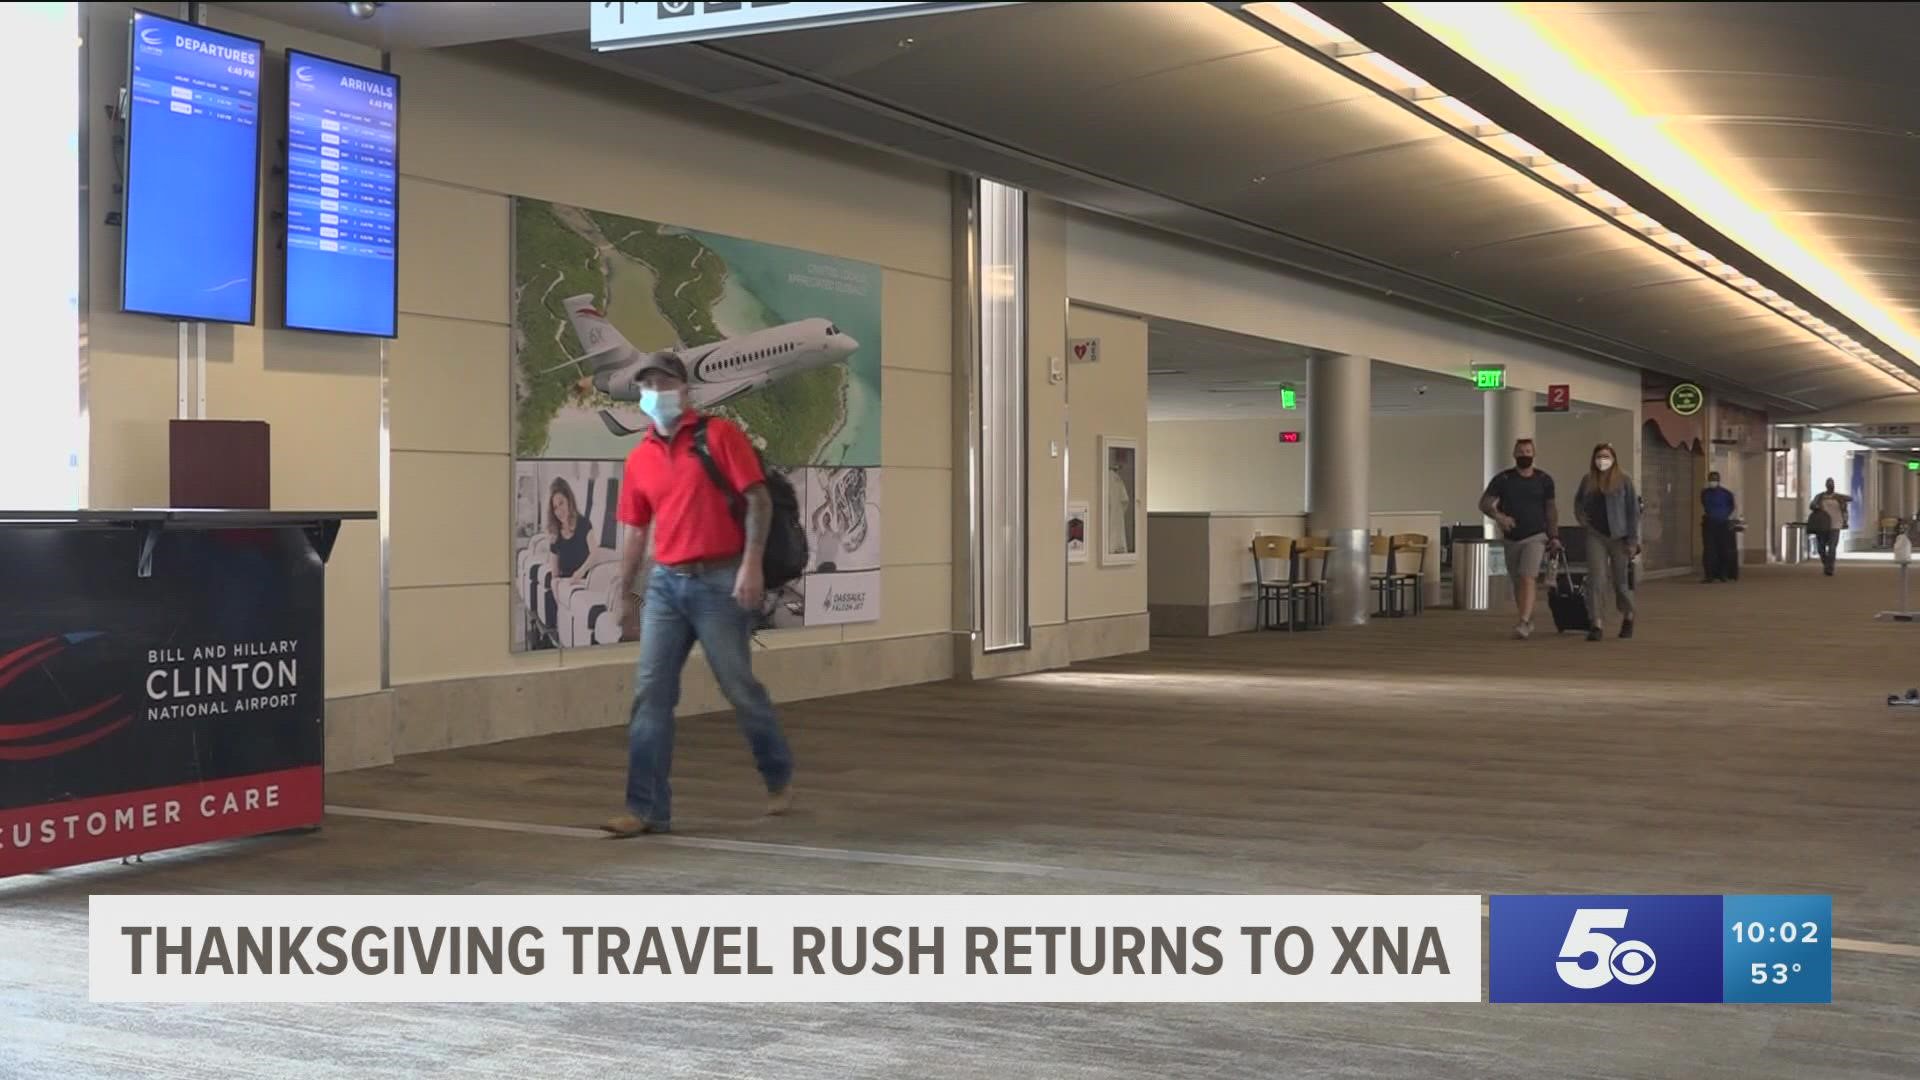 With Thanksgiving just a few days away, XNA will be at peak volume for travelers with an estimated two to 2.5 million people expected to come through the airport.